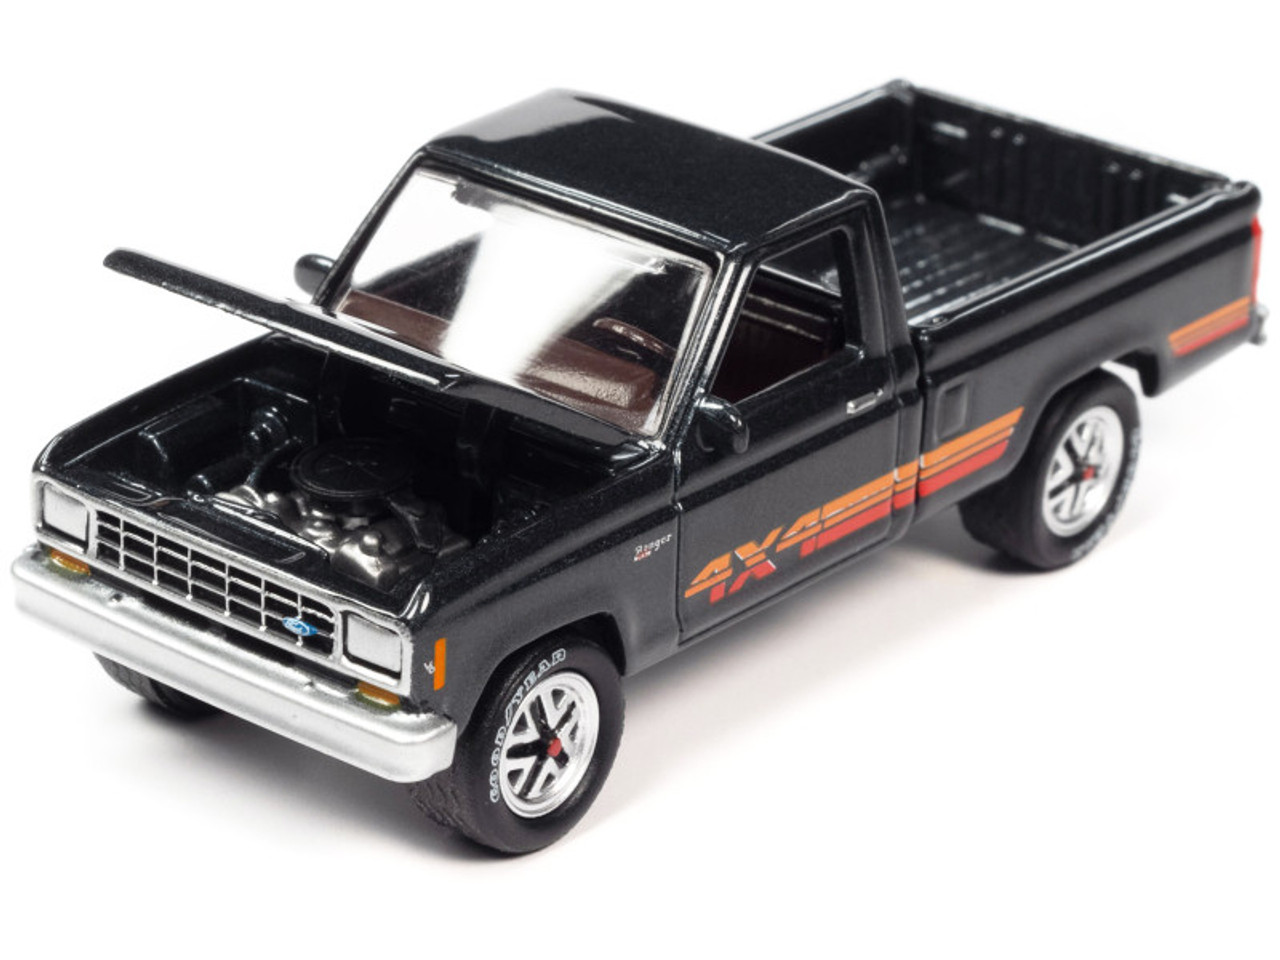 1985 Ford Ranger XL Pickup Truck Dark Charcoal Metallic with Stripes "Classic Gold Collection" 2023 Release 1 Limited Edition to 4860 pieces Worldwide 1/64 Diecast Model Car by Johnny Lightning